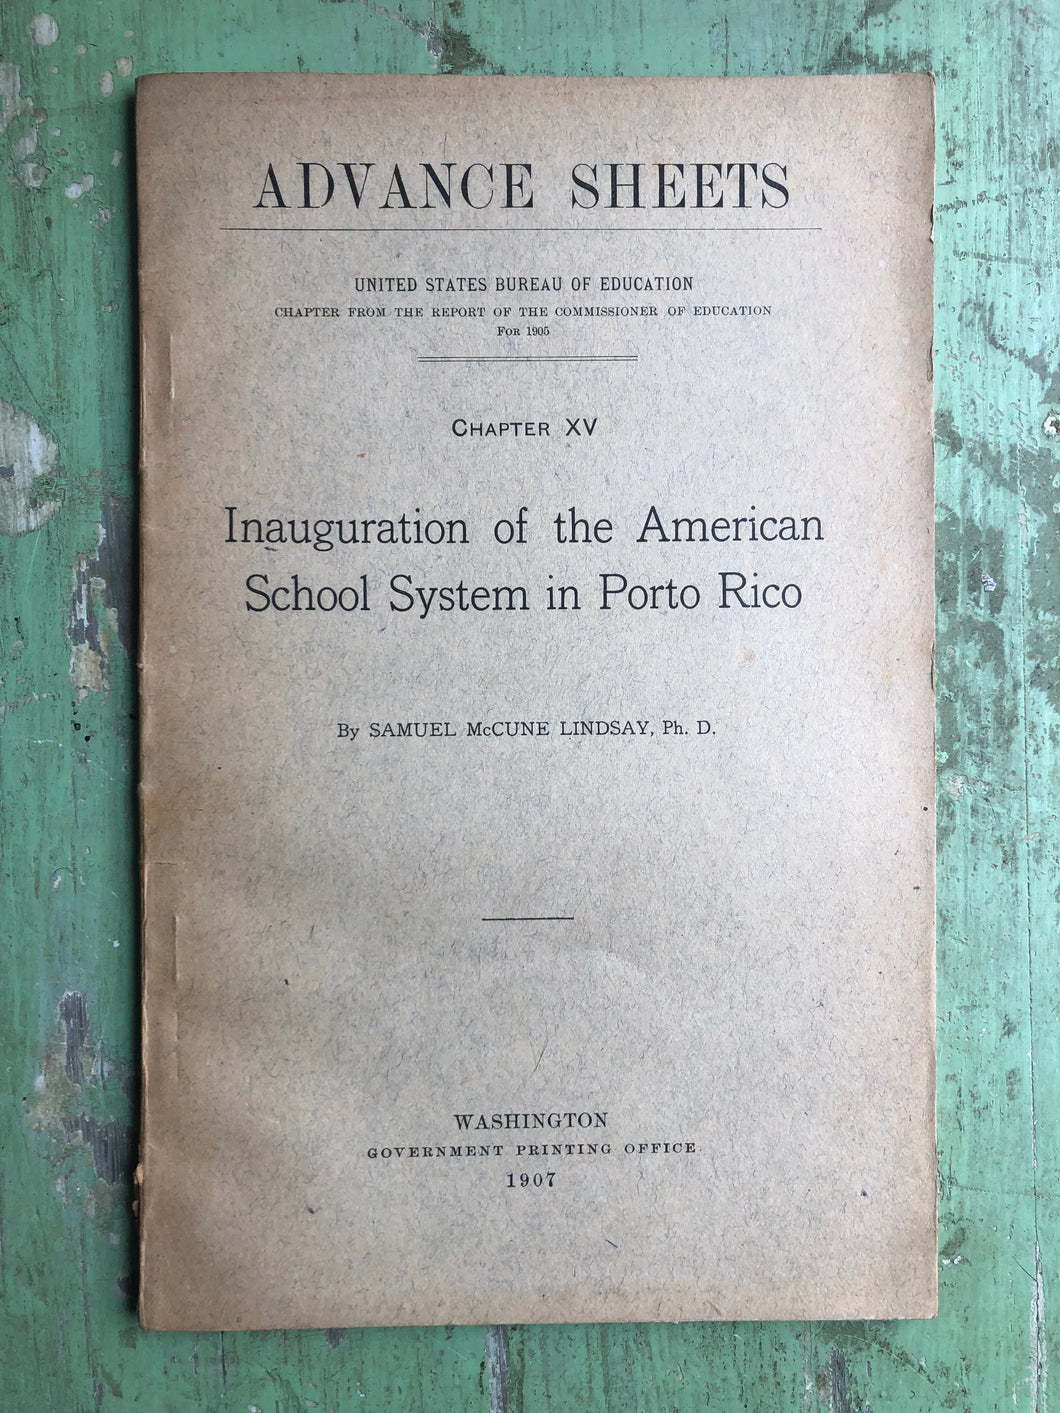 Inauguration of the American School System in Porto Rico by Samuel McCune Lindsay. Advance Sheets, Chapter XV